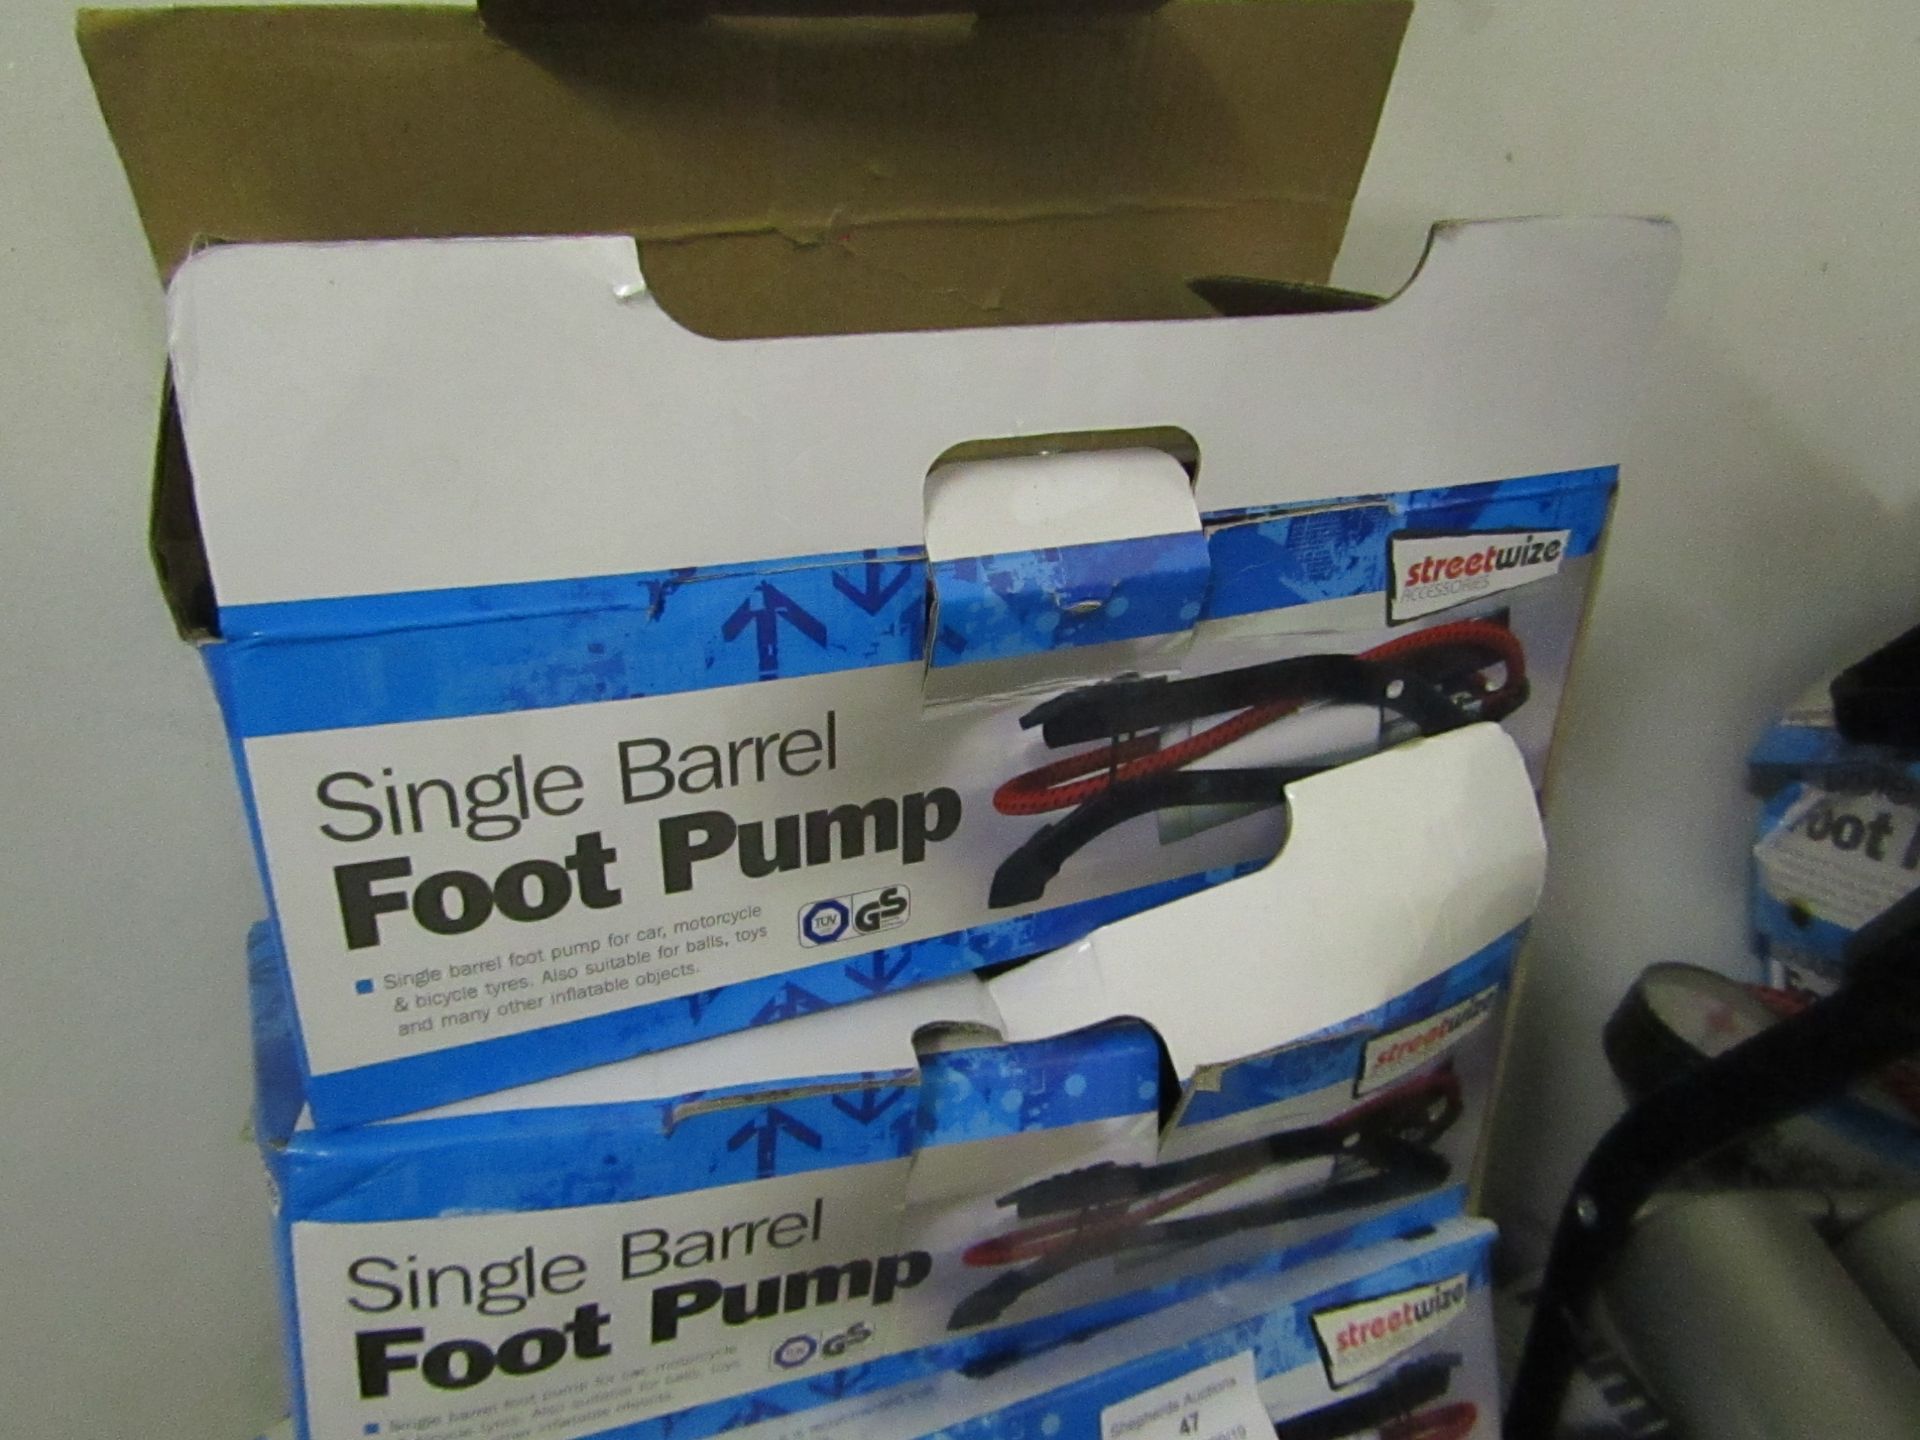 Streetwize single barrel foot pump, unchecked and boxed.